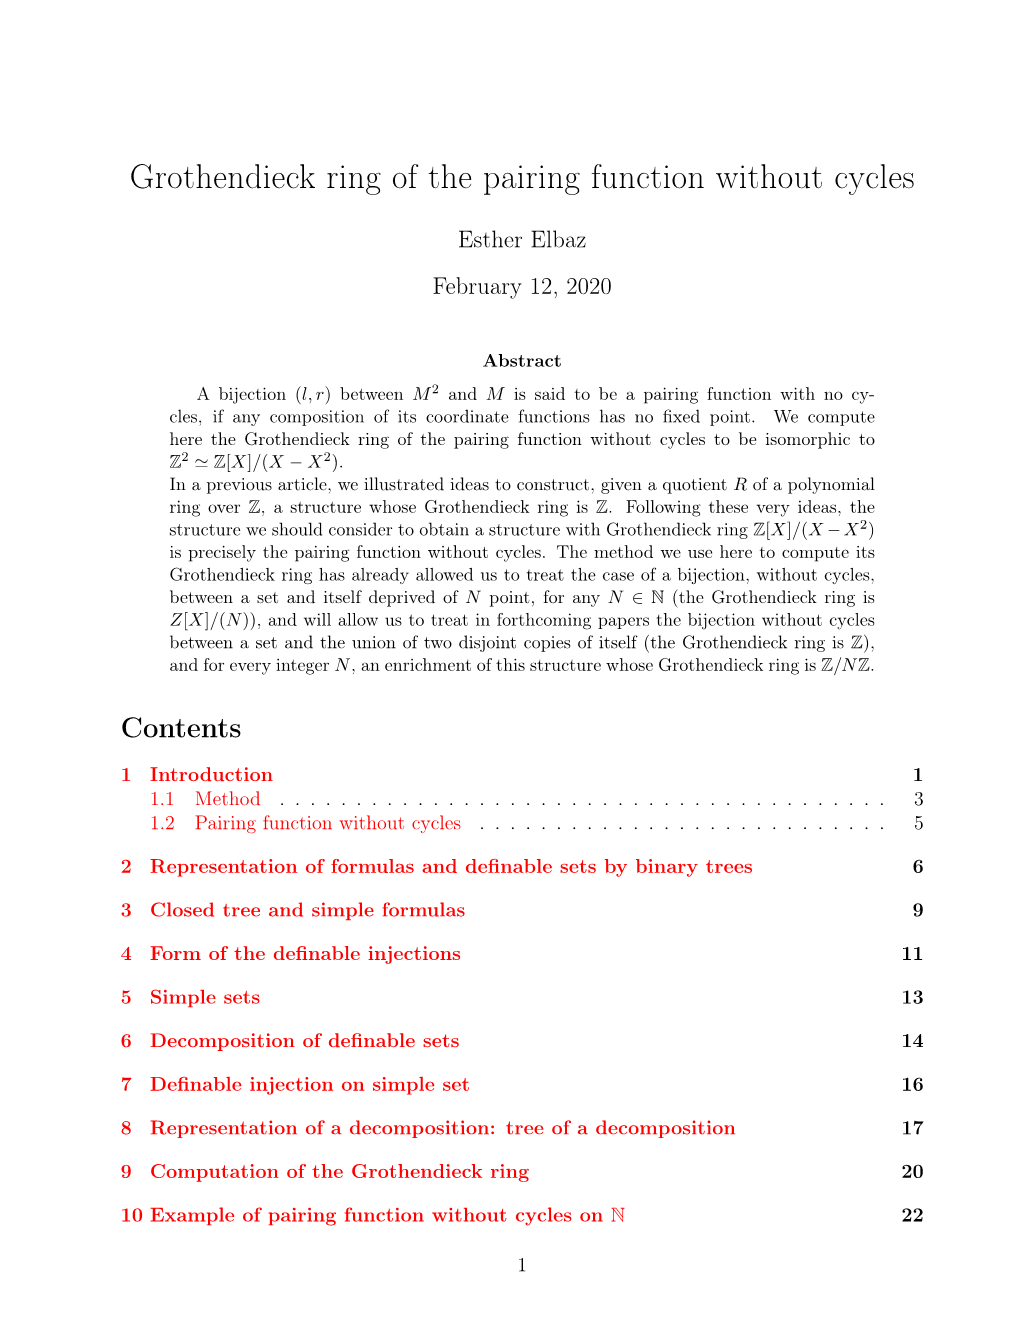 Grothendieck Ring of the Pairing Function Without Cycles